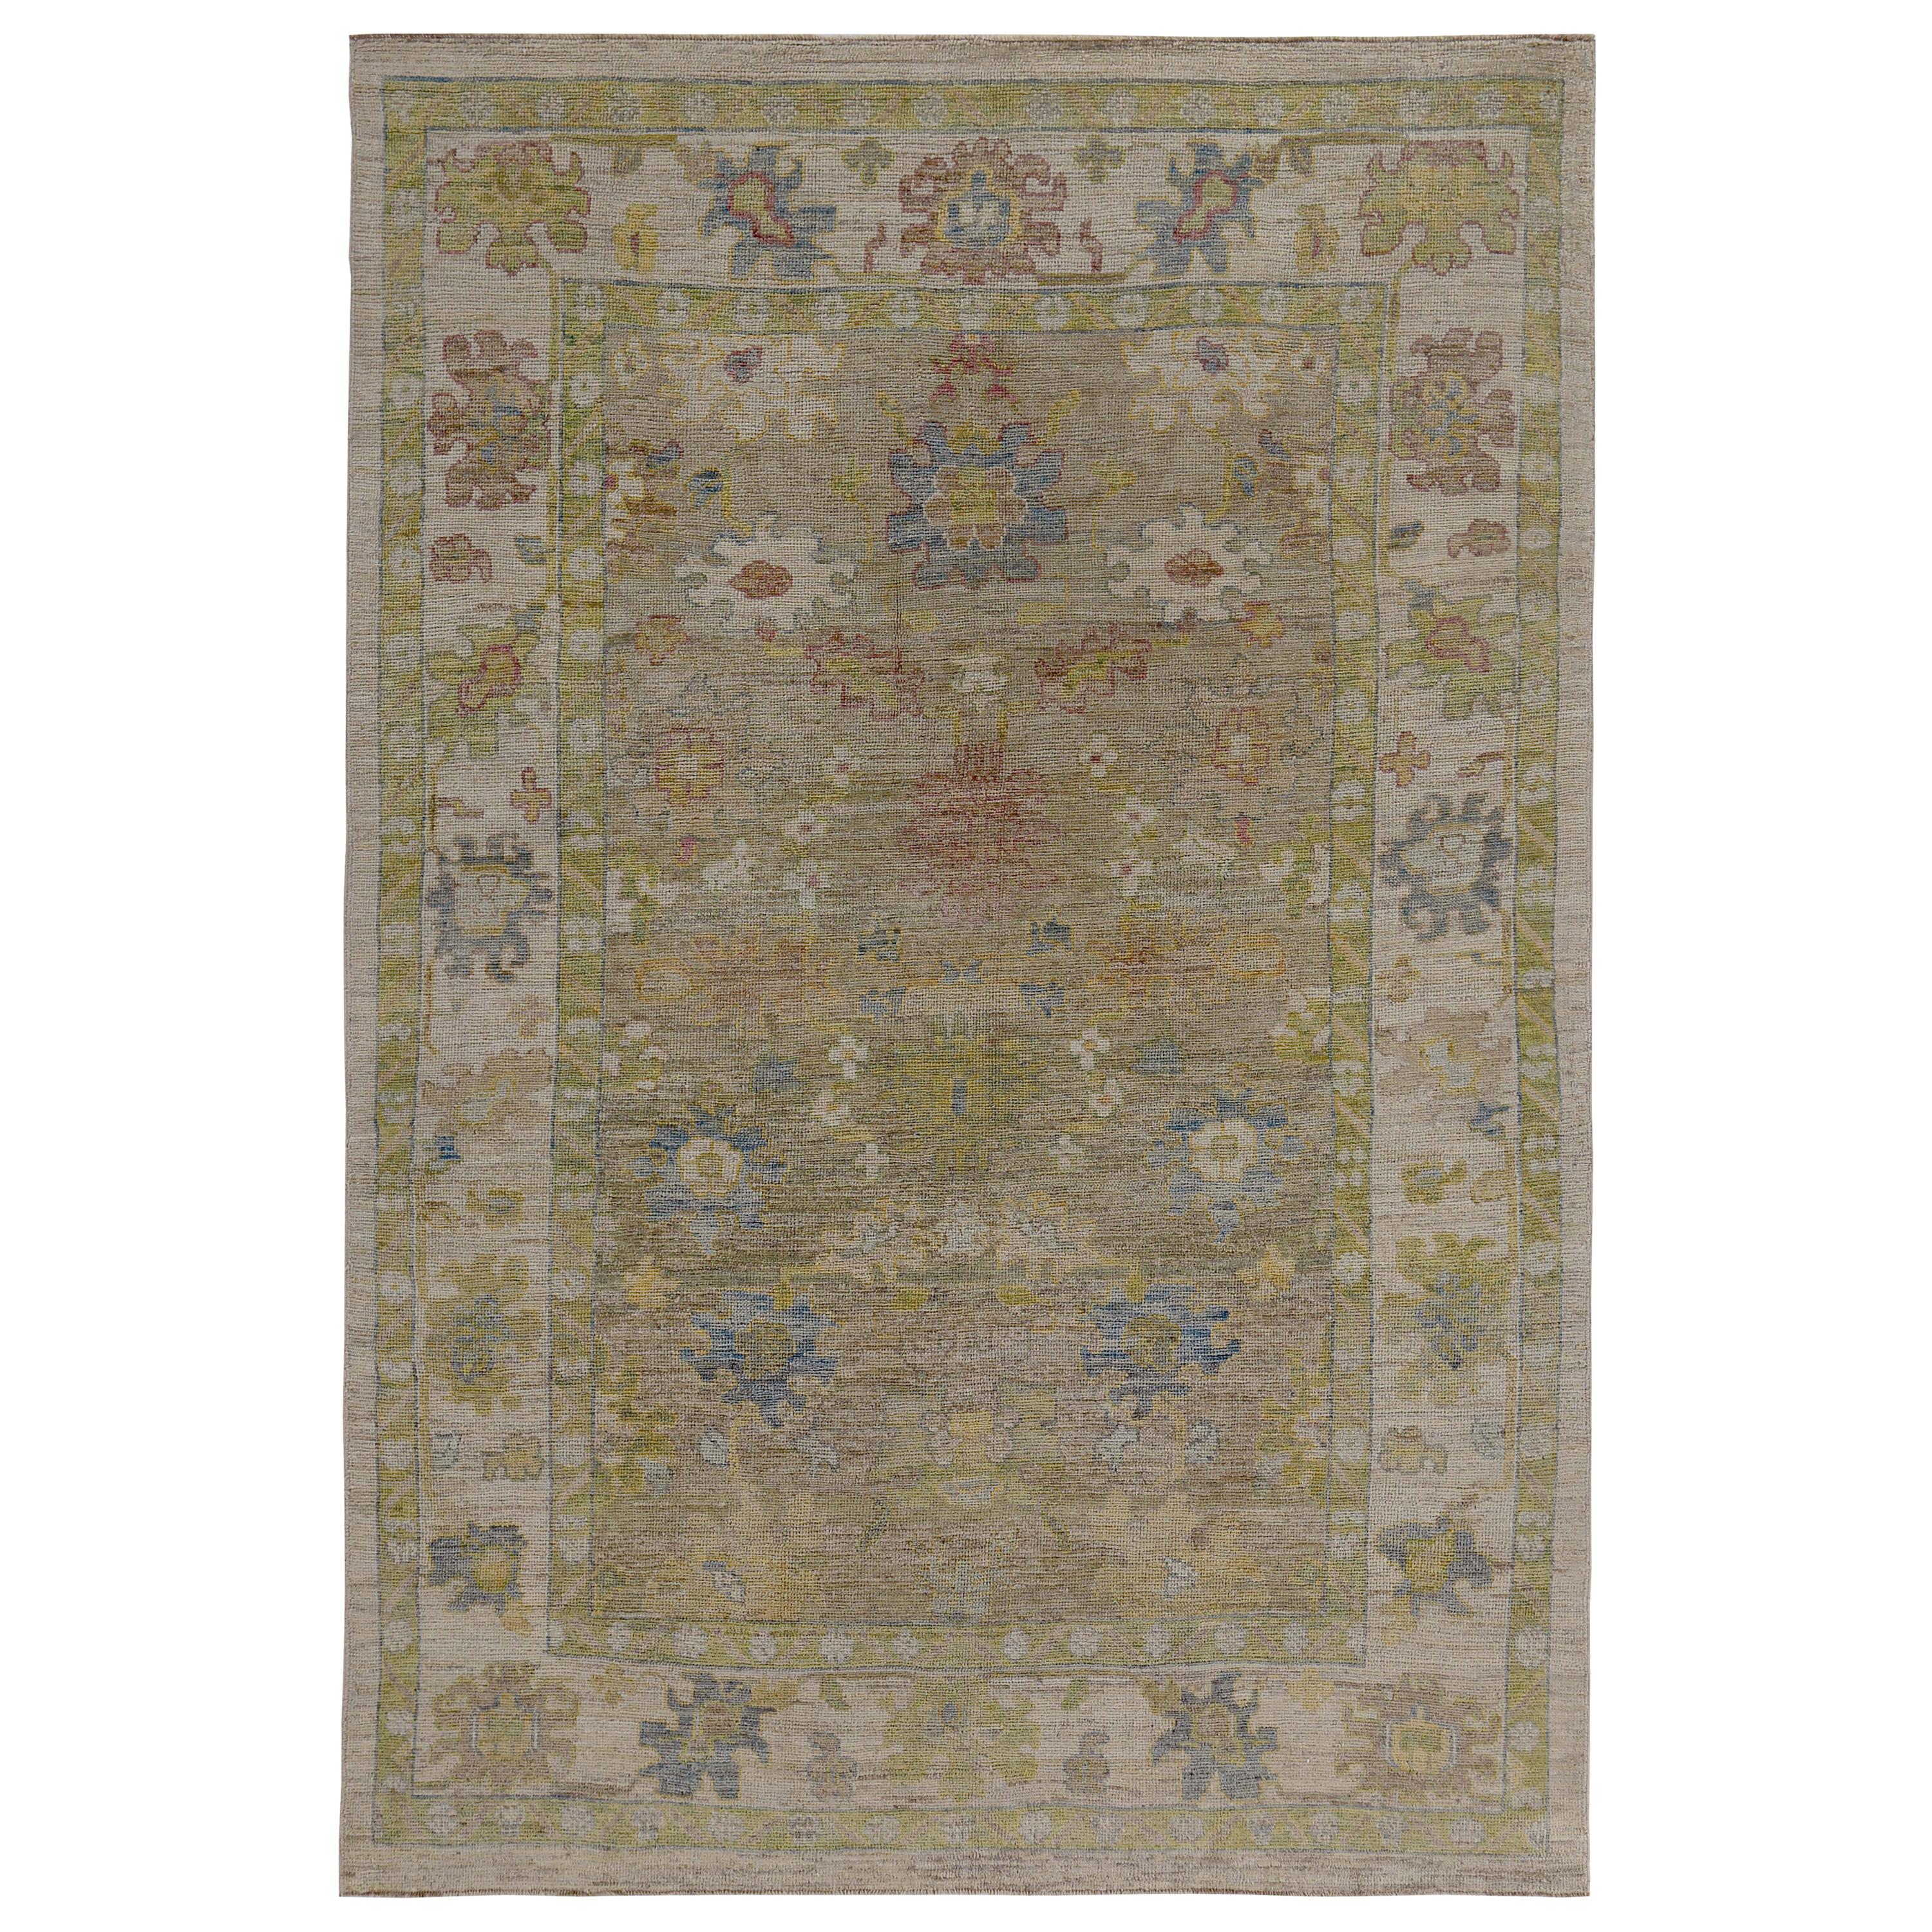 Turkish Oushak Rug with Blue, Red and Green Flower Heads on Brown Field For Sale